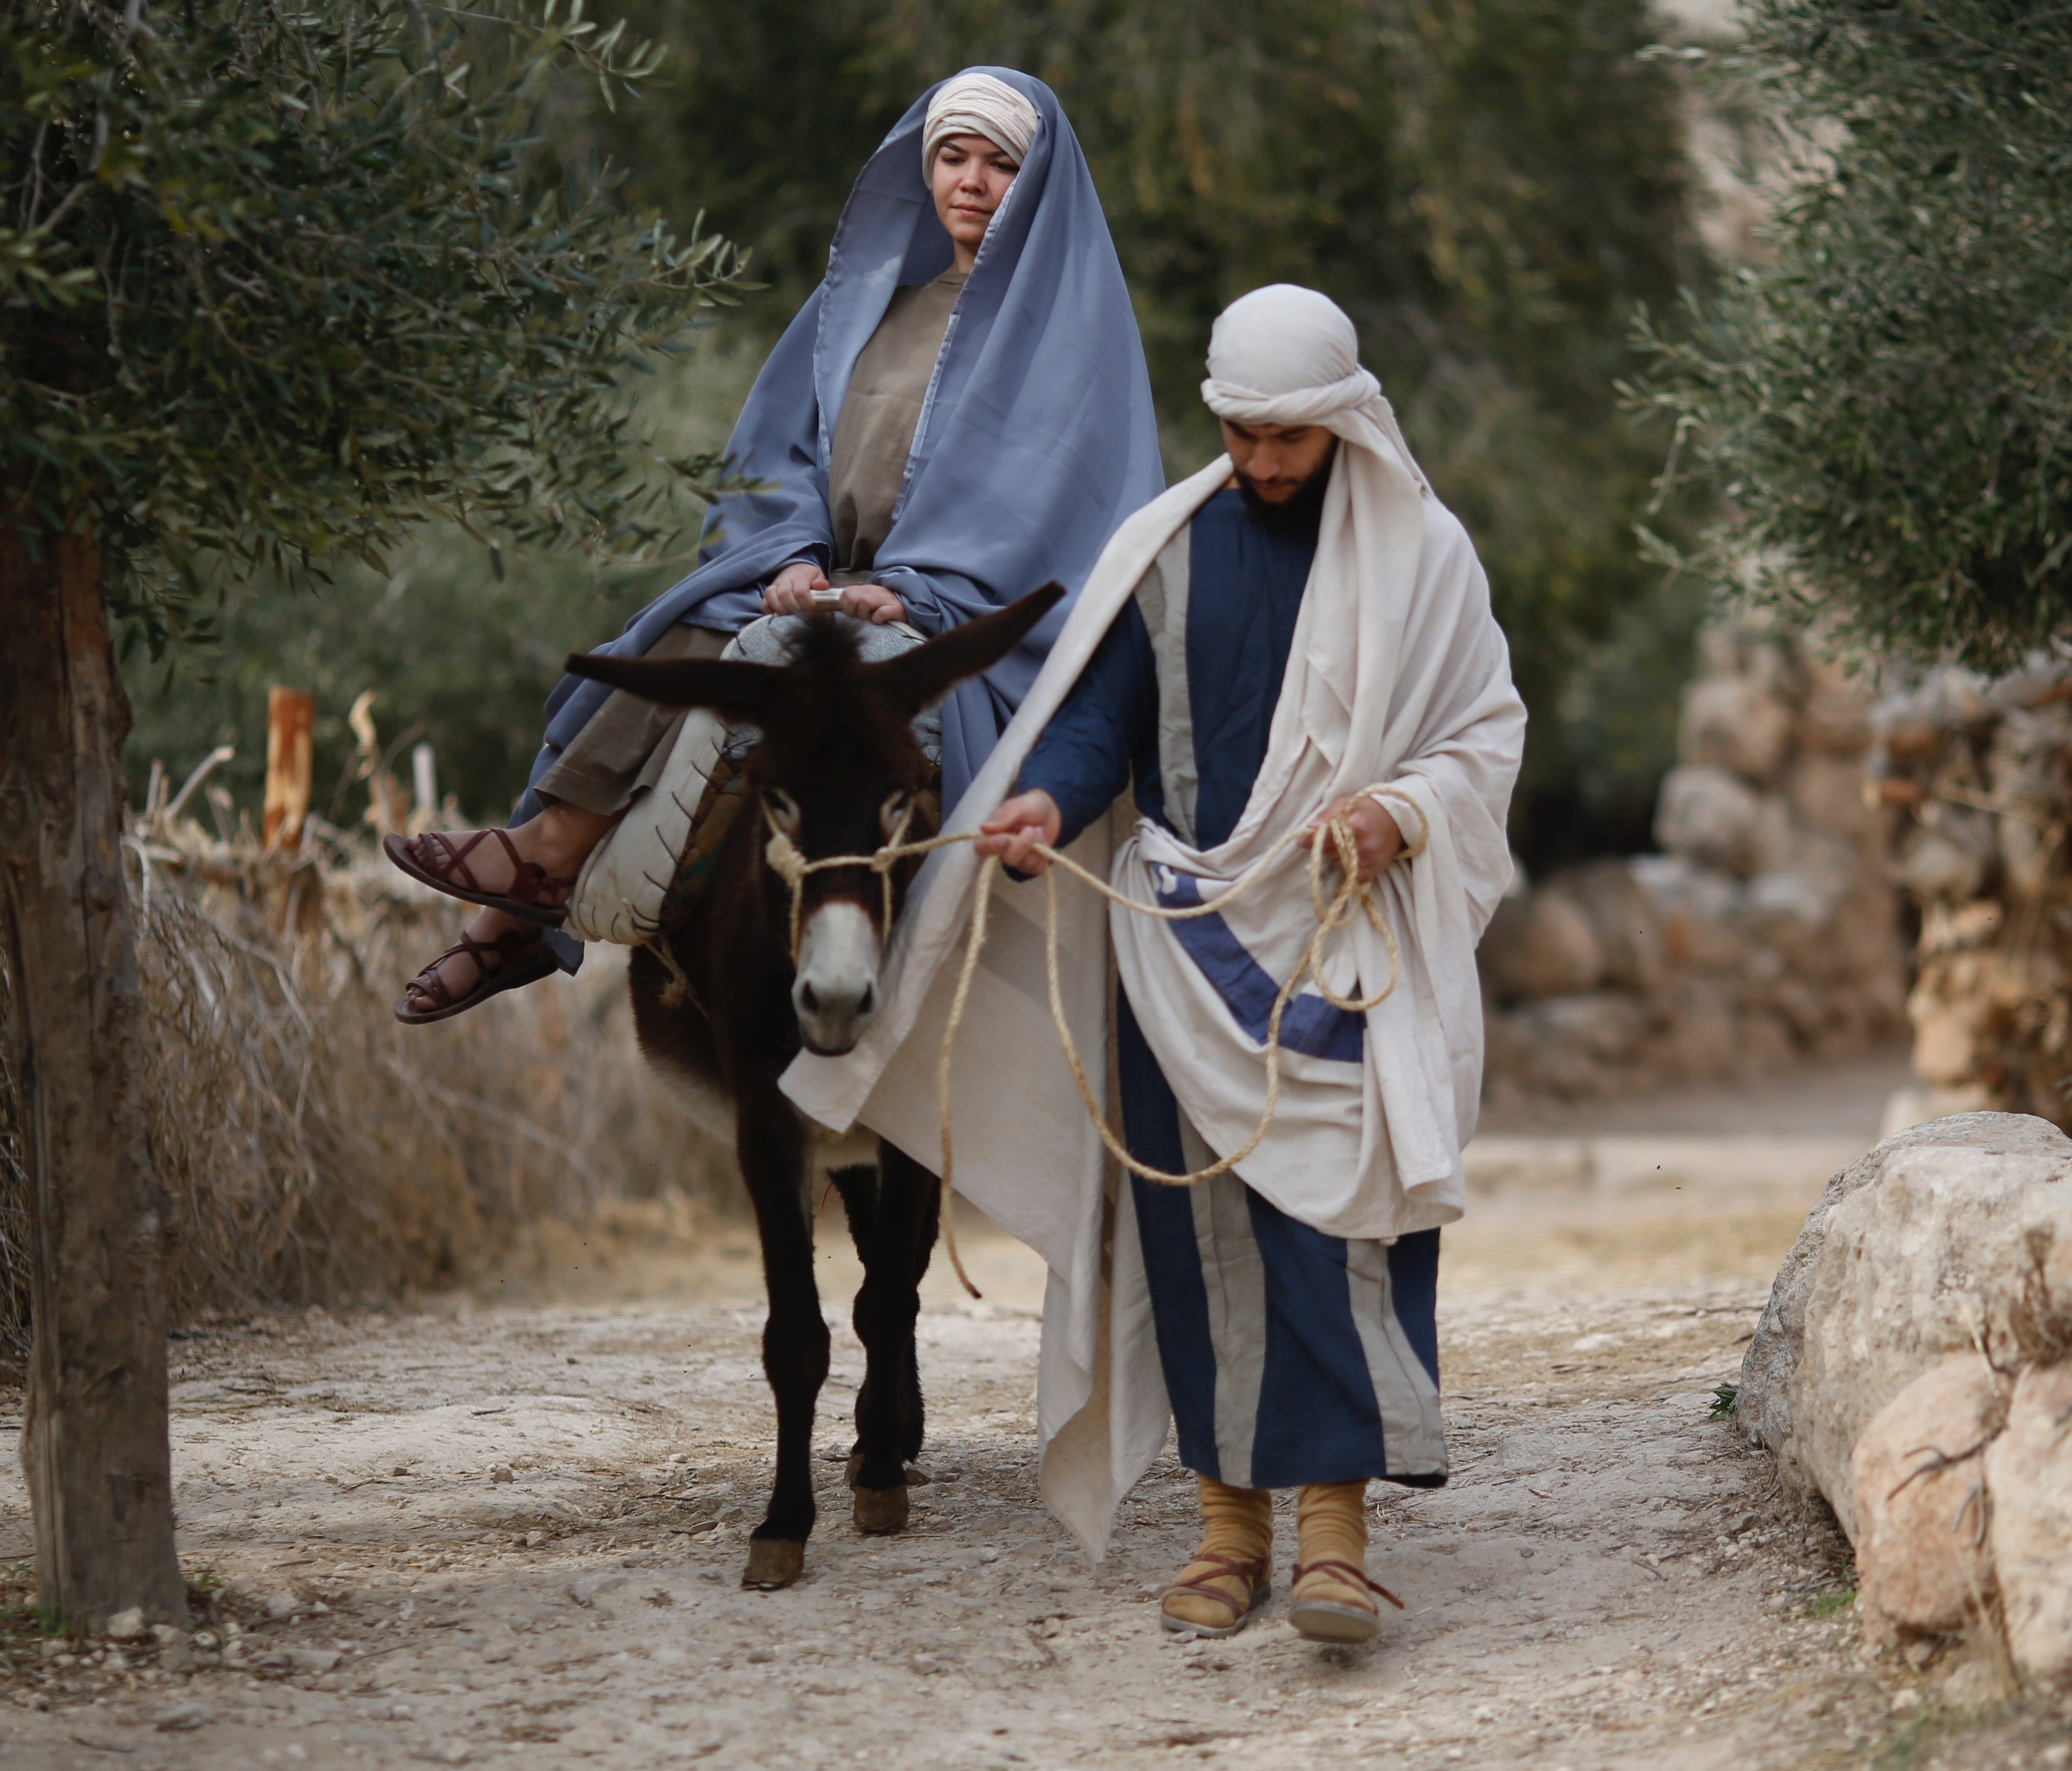 Christian actors portray Joseph and Mary during a re-enactment of a Nativity scene of the journey to Bethlehem as part of Christmas festivities at the Nazareth Village, northern Israel, Thursday, Dec. 21, 2017.